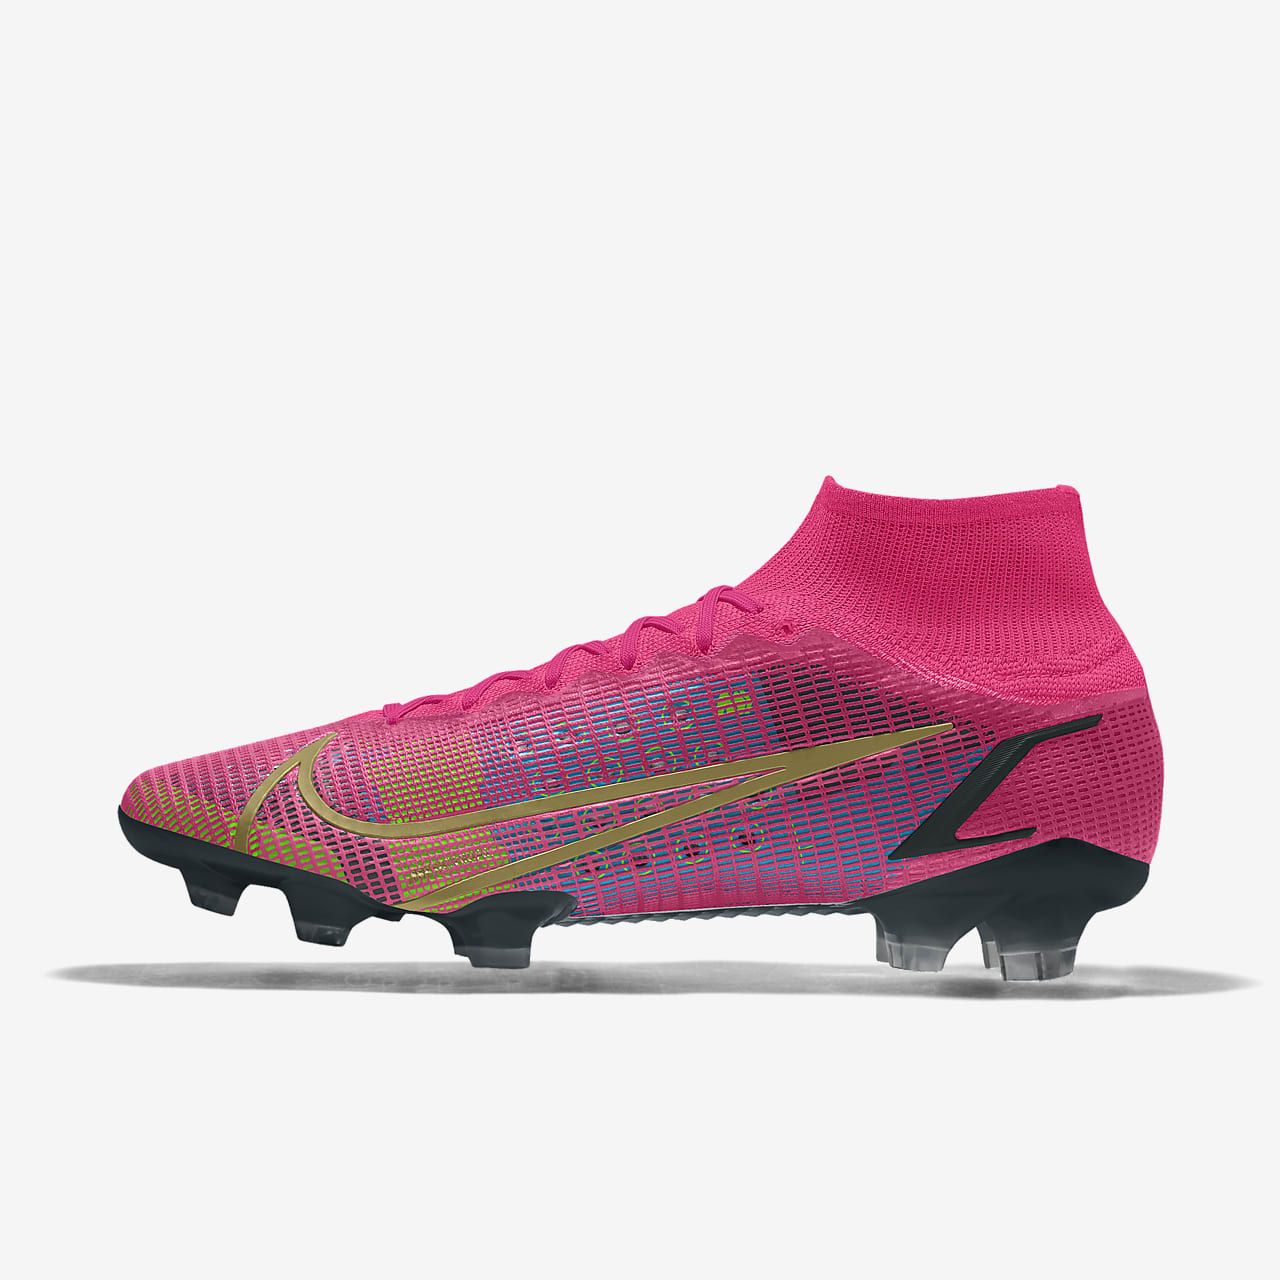 womens mercurial soccer cleats